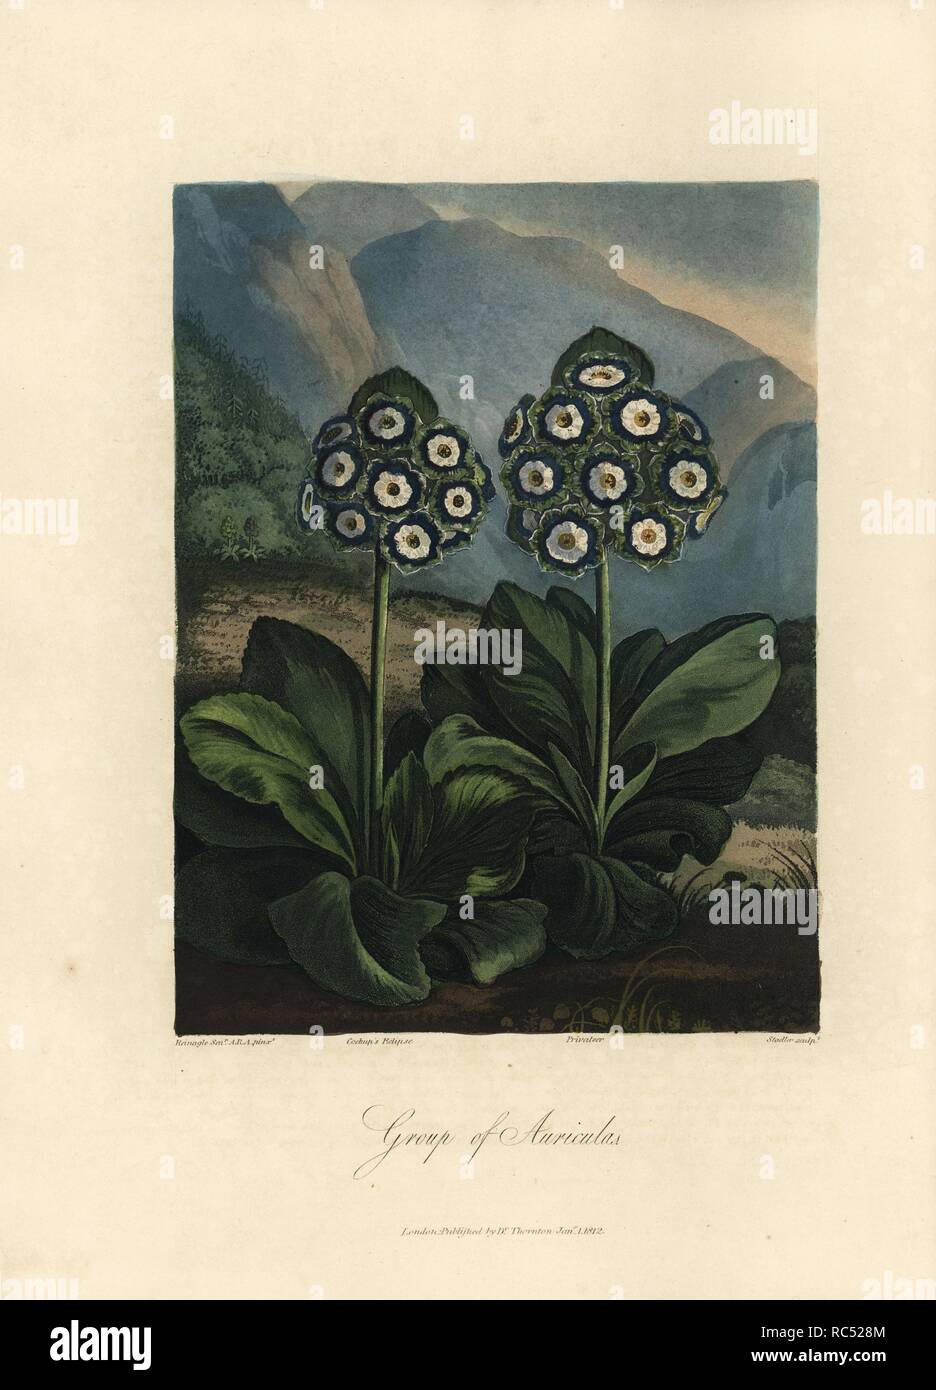 Primula auricula varieties: Cockup's Eclipse and Privateer. Painted by Reinagle Sr., engraved by Stadler. Handcoloured stipple copperplate engraving from Dr. Robert Thornton's 'Temple of Flora,' Lottery edition, London, 1812. The illustrations were a mix of aquatint, mezzotint and stipple engravings finished by hand. Stock Photo